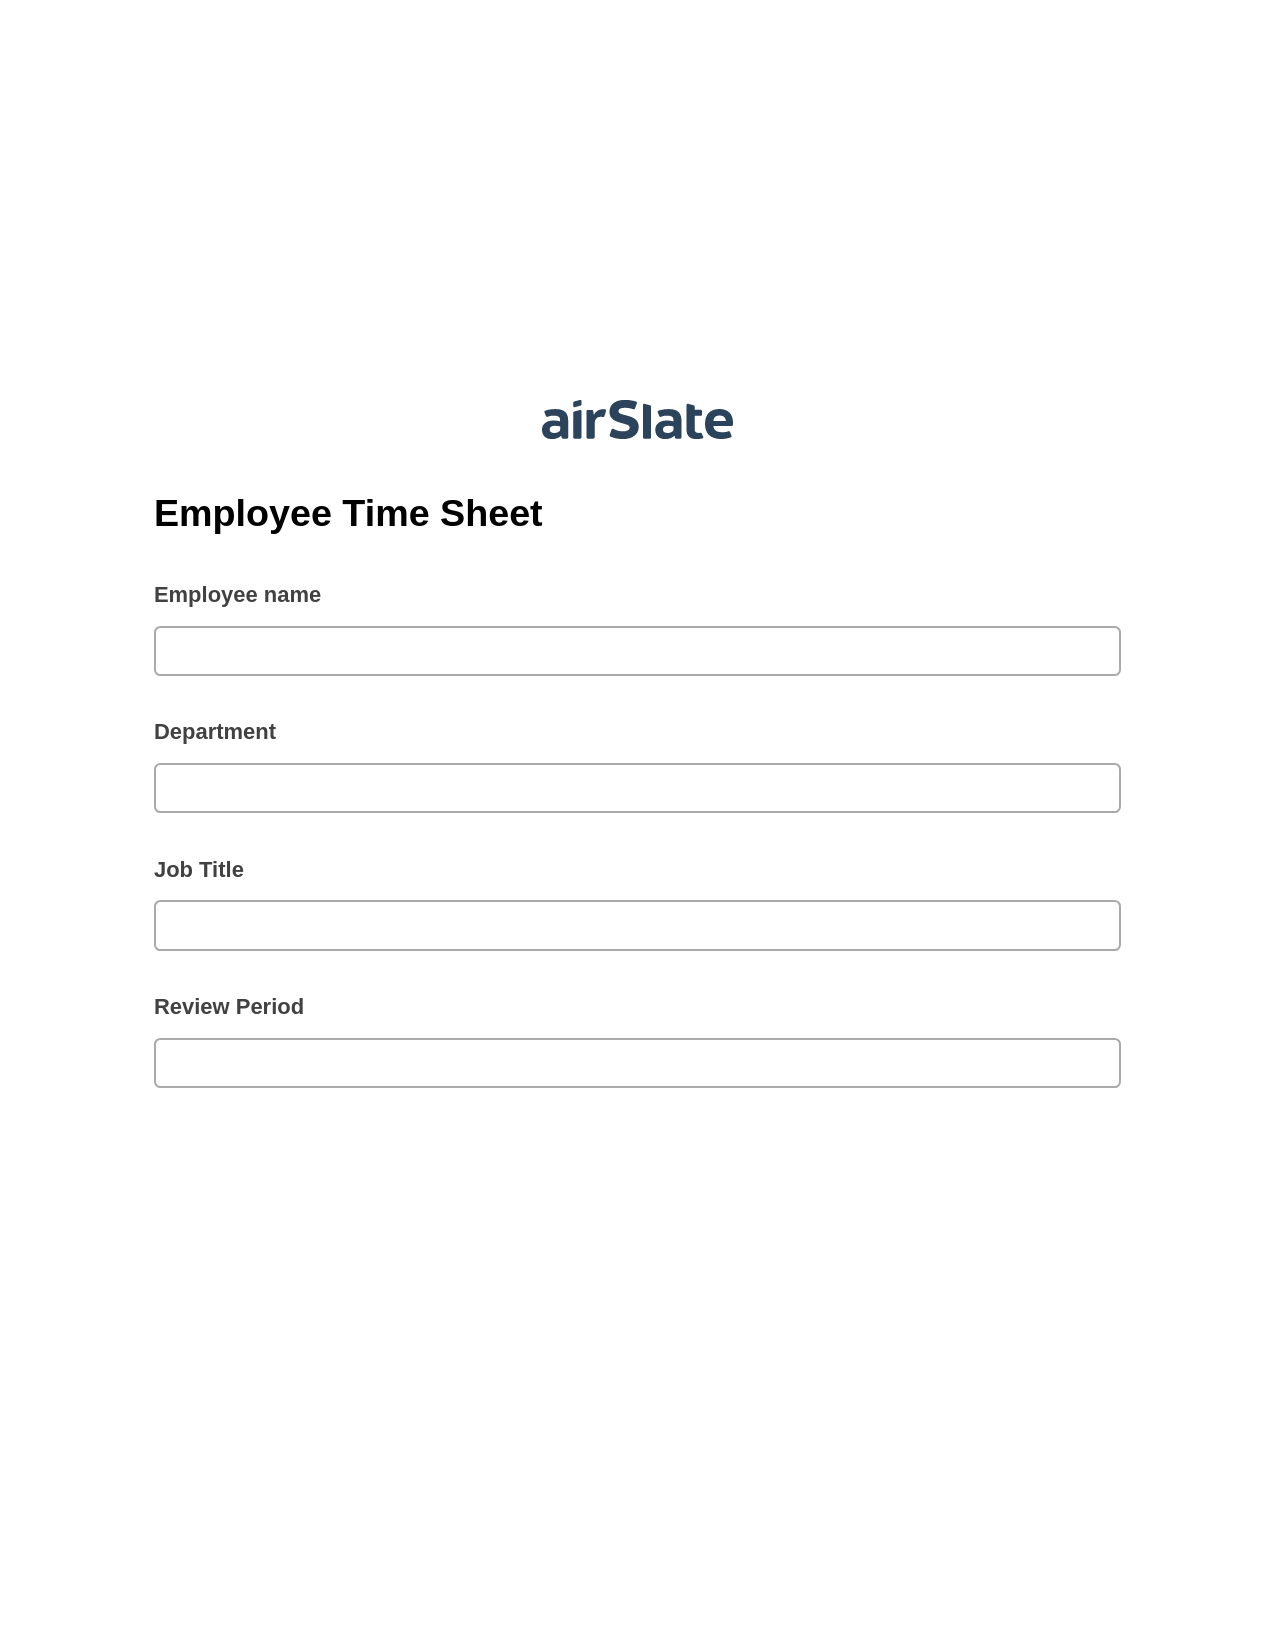 Employee Time Sheet Pre-fill Document Bot, Update Audit Trail Bot, Export to WebMerge Bot